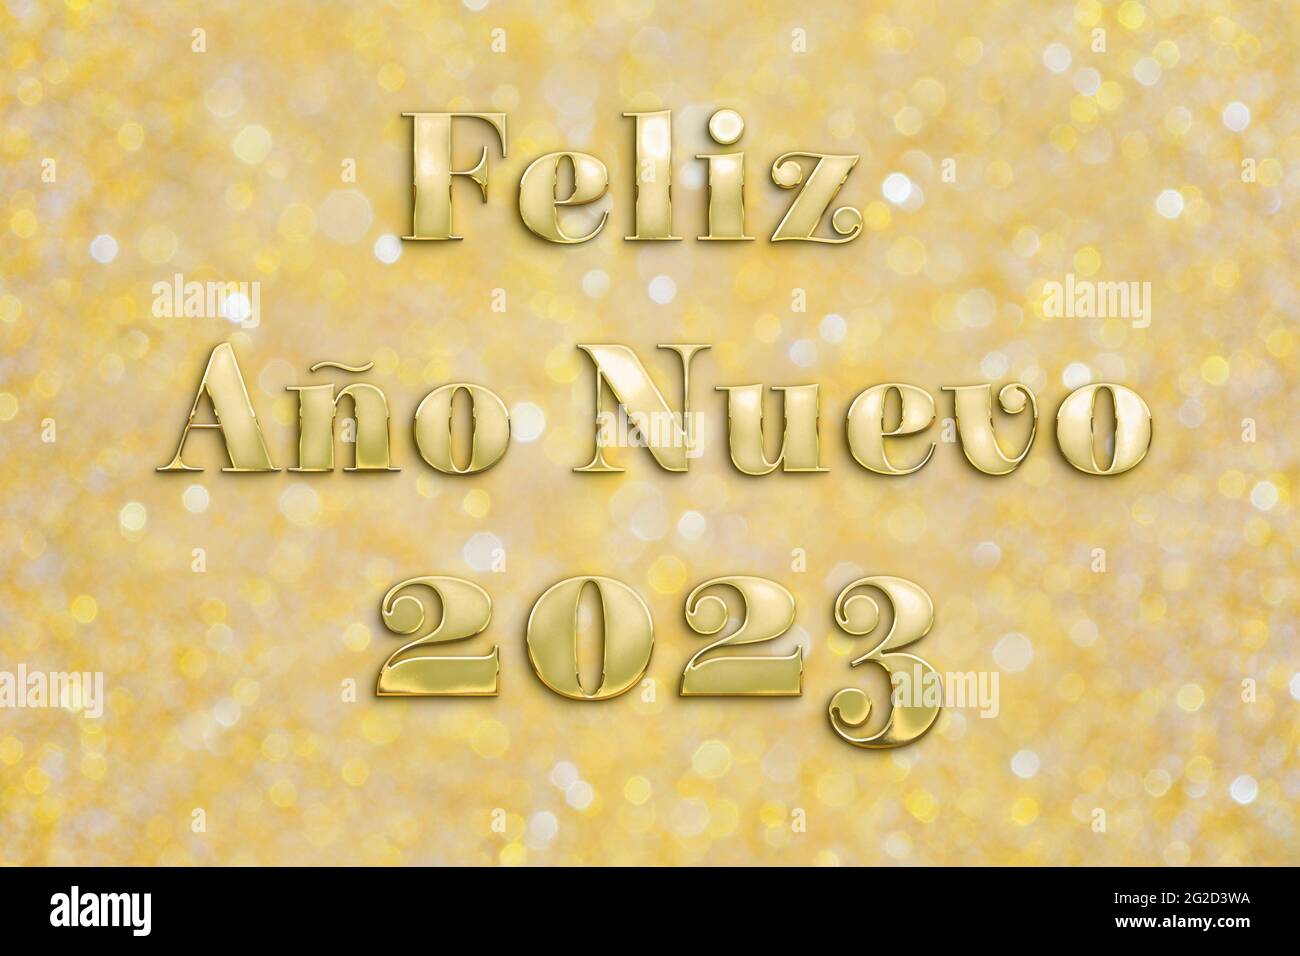 'Feliz Año Nuevo 2023' text in golden letters over shiny gold colored blurred bokeh glitter background. Stock Photo